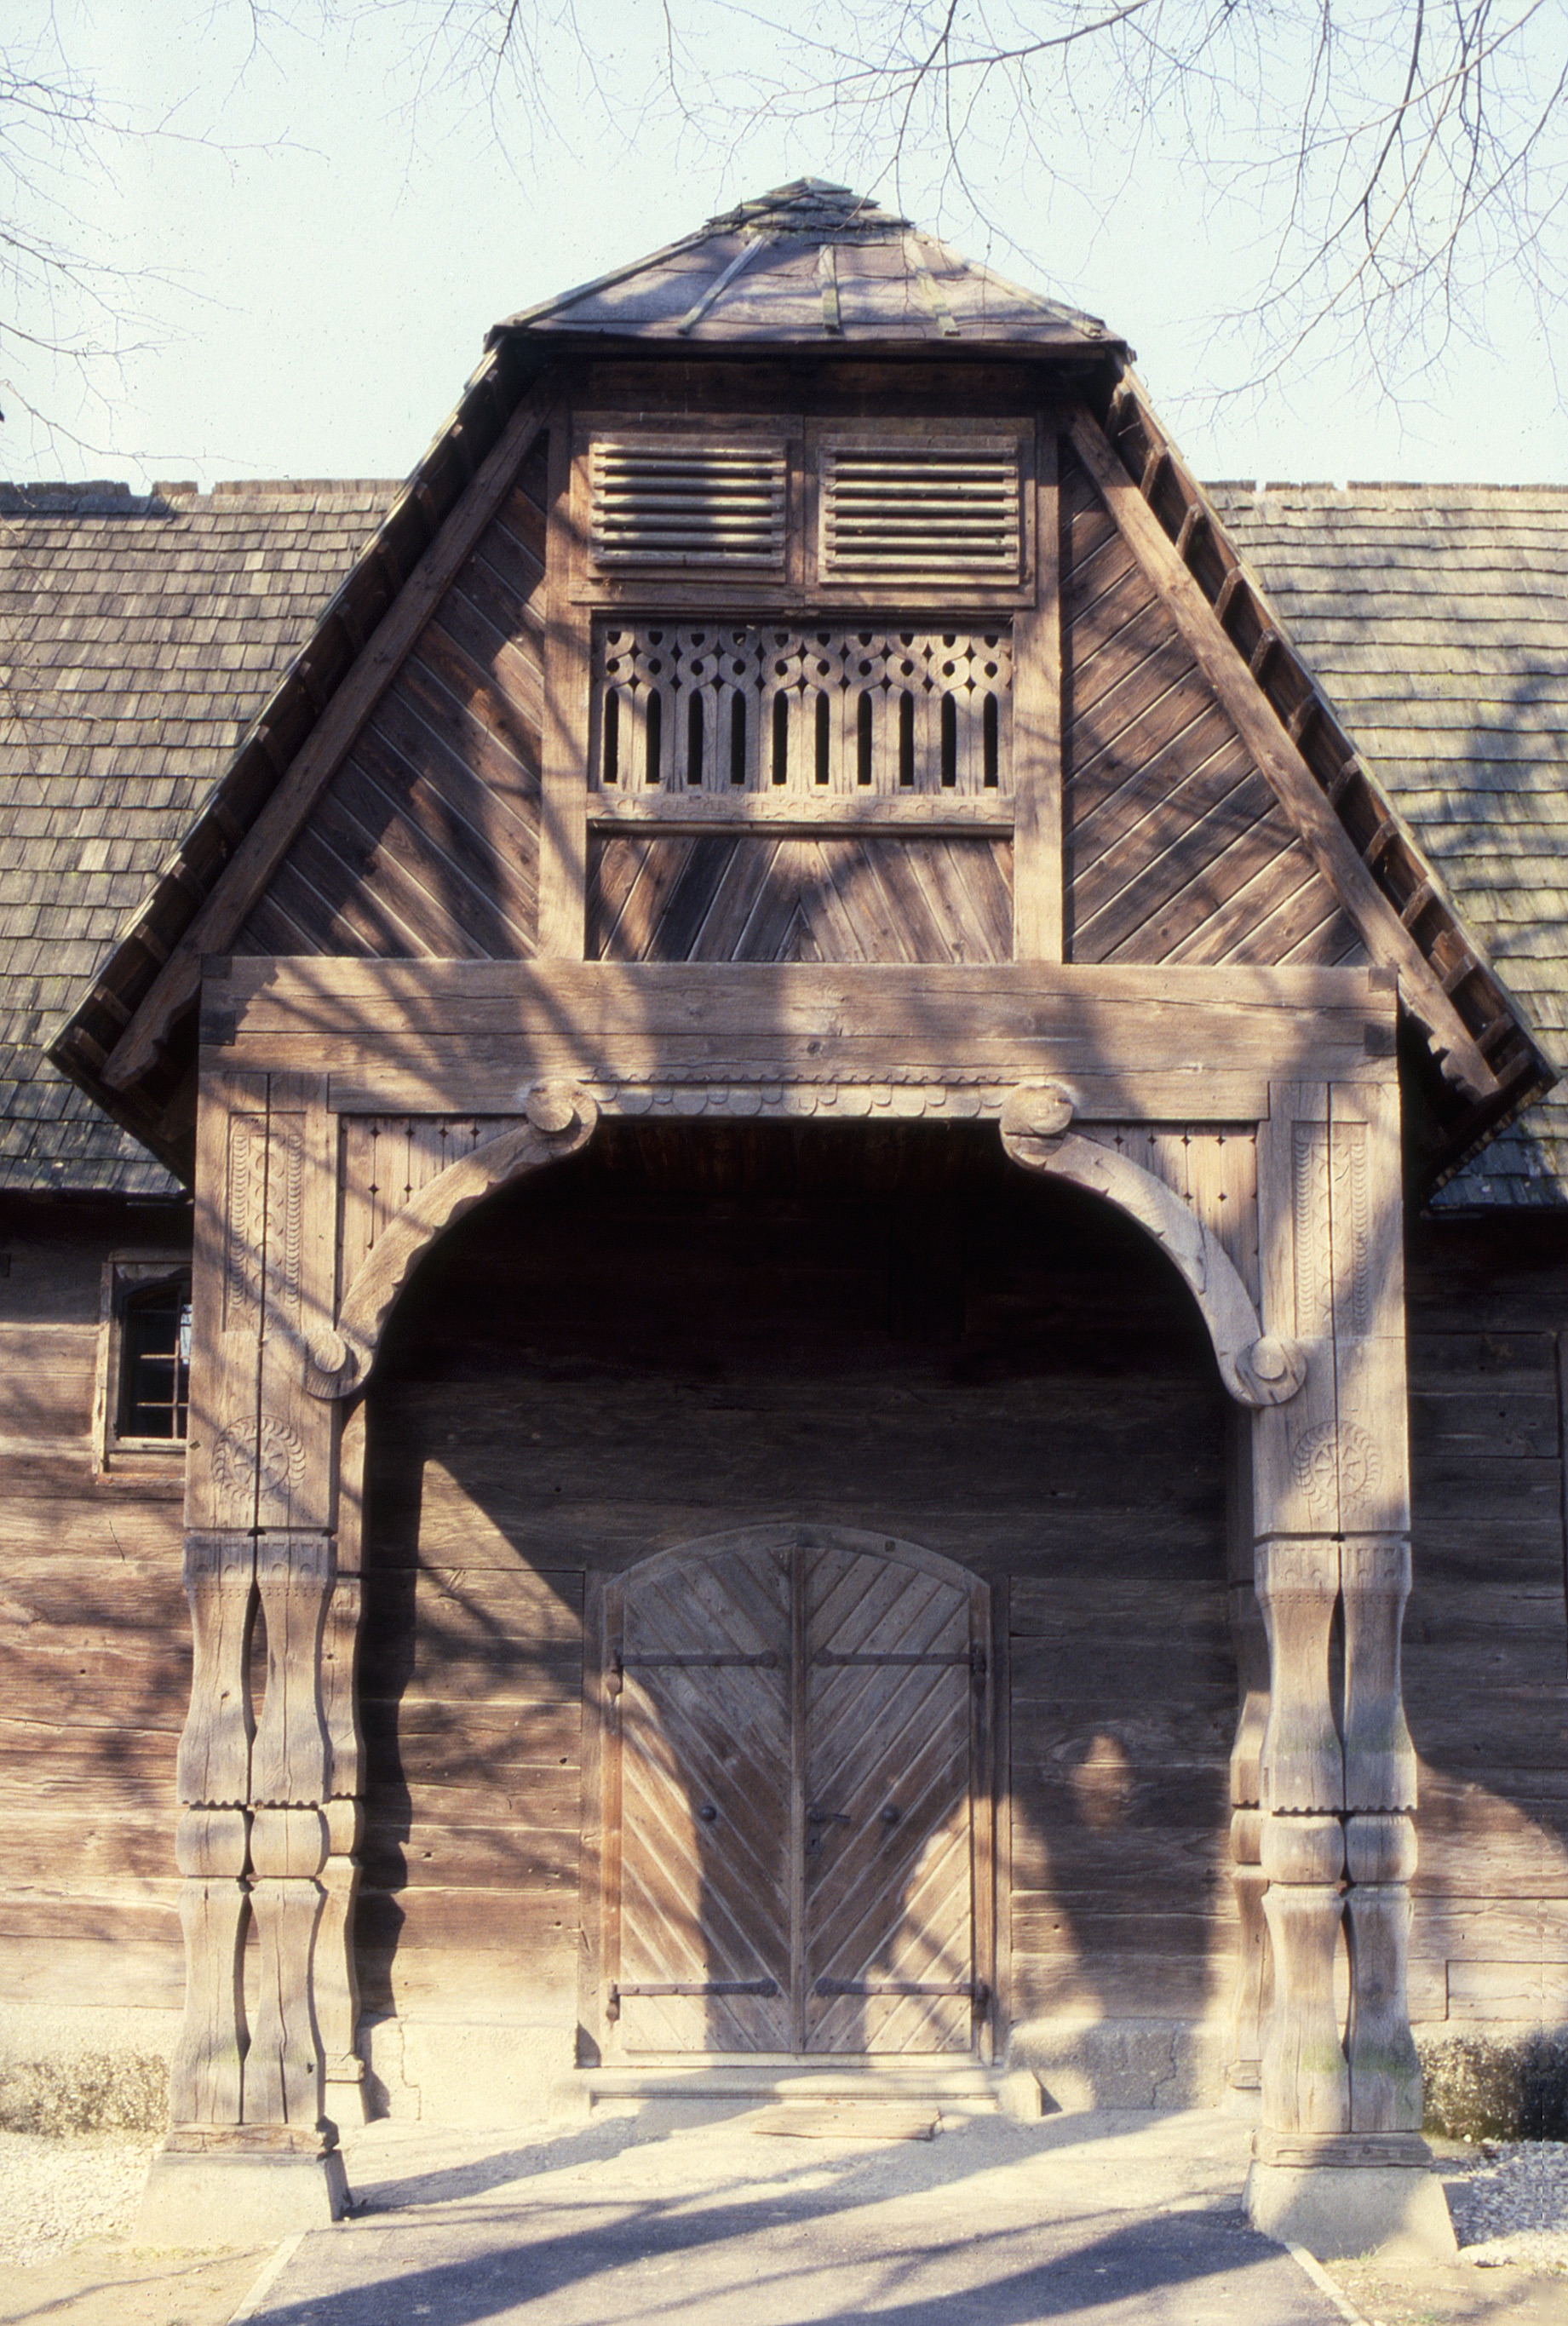 <p>The composition of shapes and woodworking within the upper framework (pediment) and subtlety of the carved details of the chapel's entry porch is evident in this sunlit view.</p>